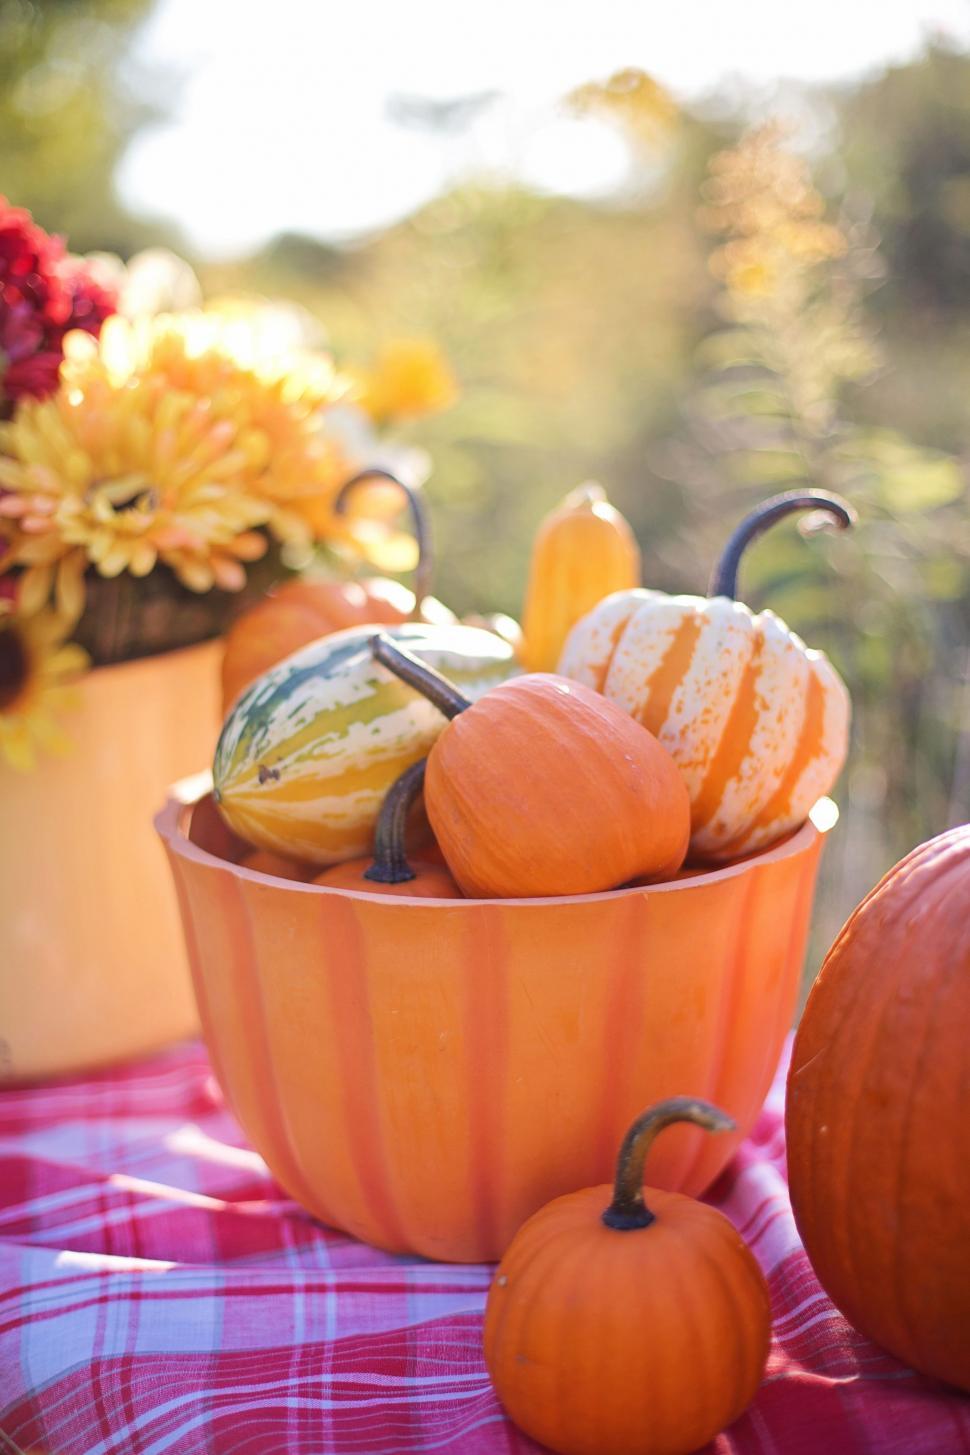 Free Image of Pumpkins and Gourds 